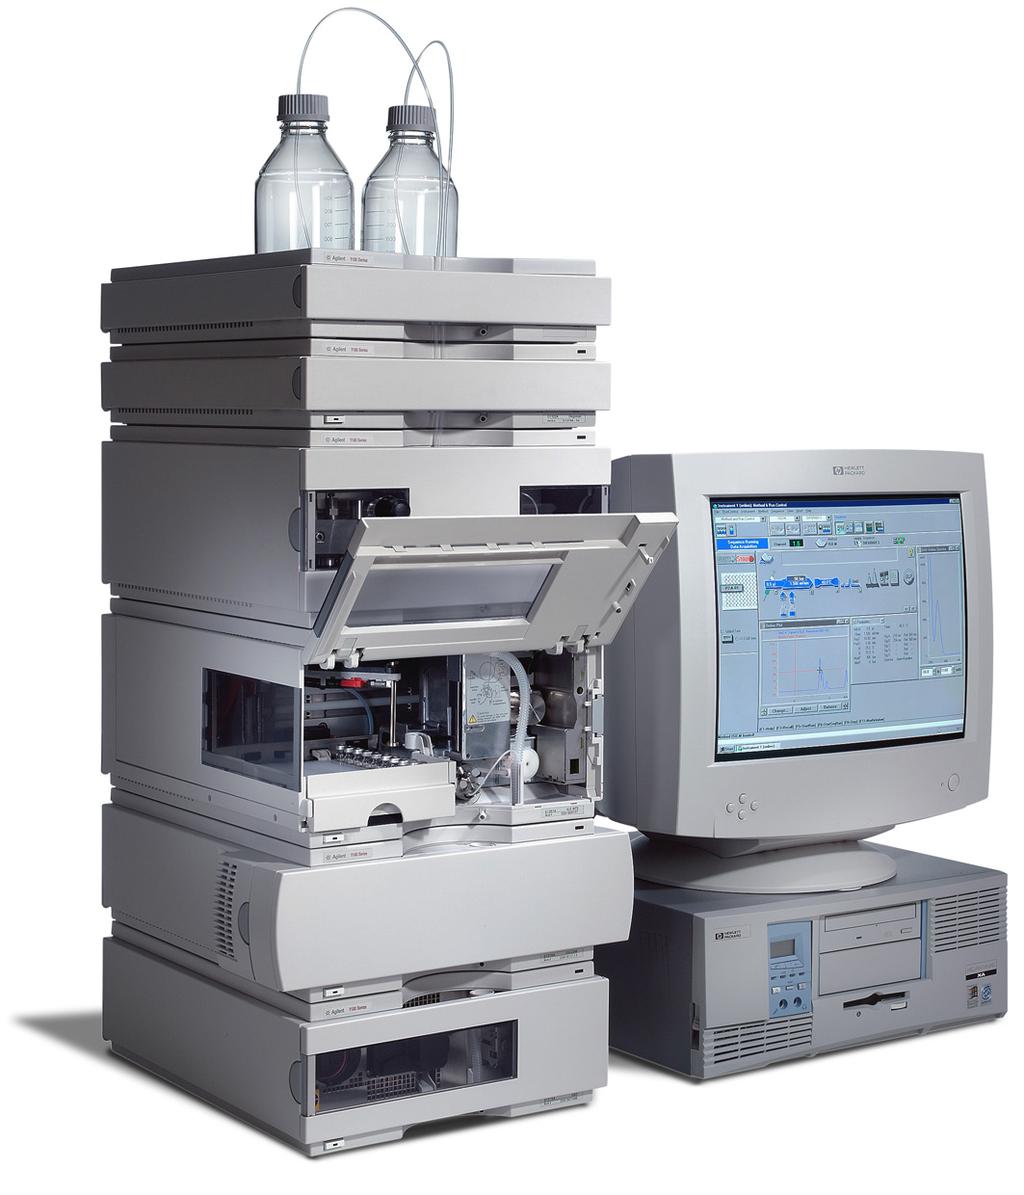 System Requirements Visit at the Autosampler Manufacturer Introduction in Chromatography Modular stack for liquid analysis Position and purpose of Autosampler in the stack Discussion with engineers